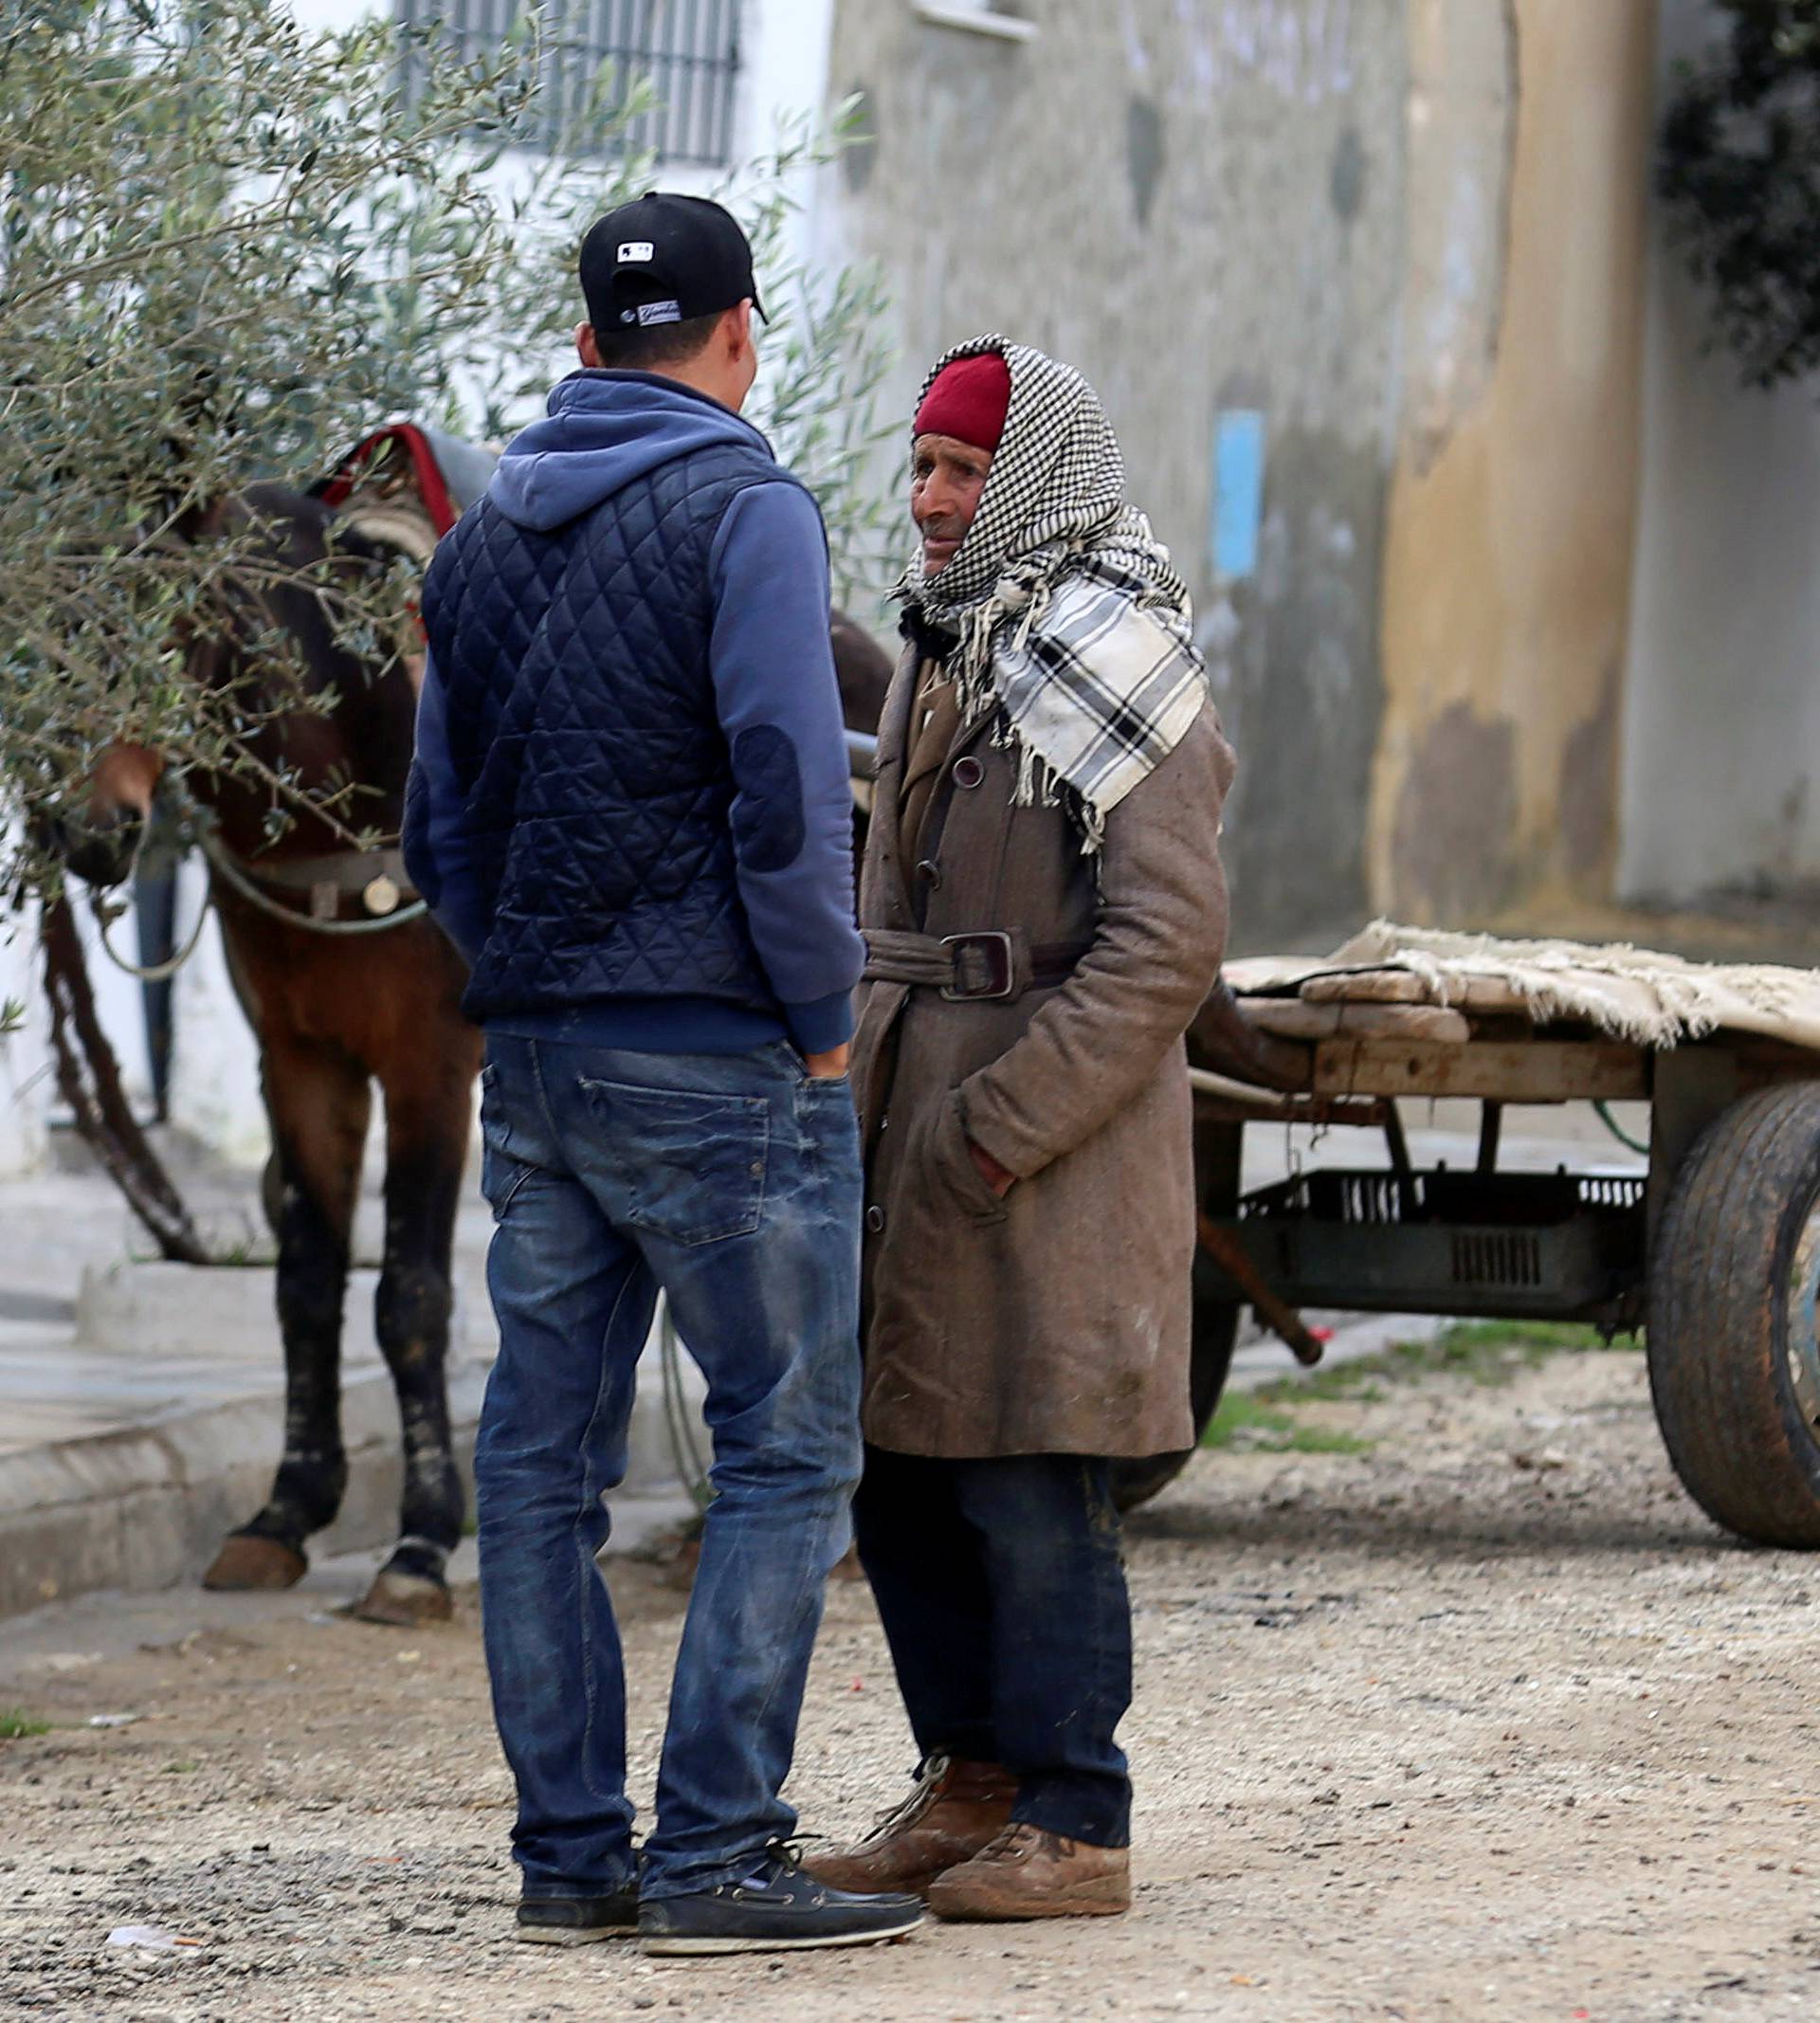 Mustapha Amri, father of suspect Anis Amri who is sought in relation with the truck attack on a Christmas market in Berlin, speaks with his son Walid near their home in Oueslatia, Tunisia